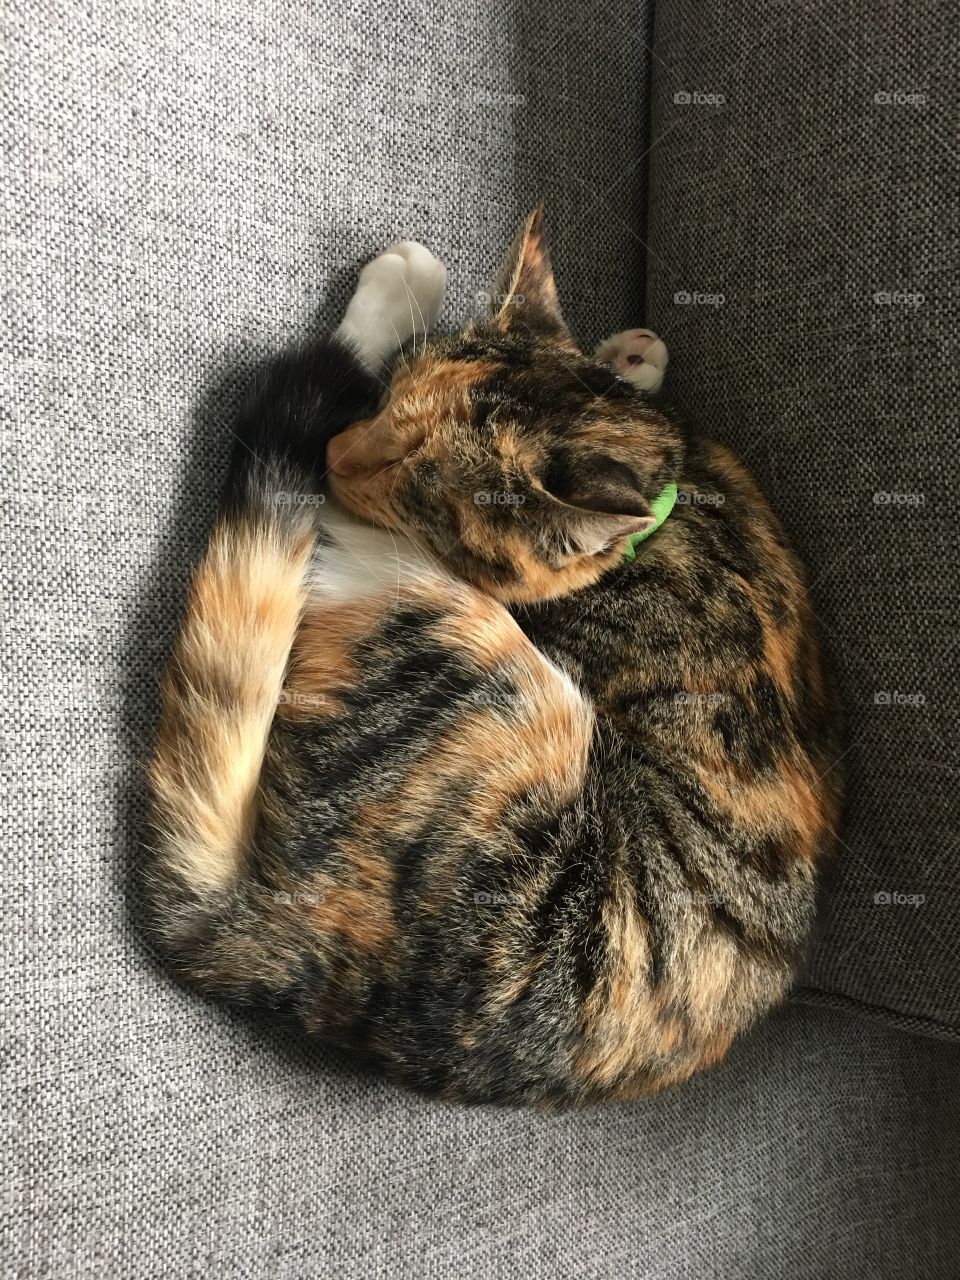 Cat is sleeping on a couch